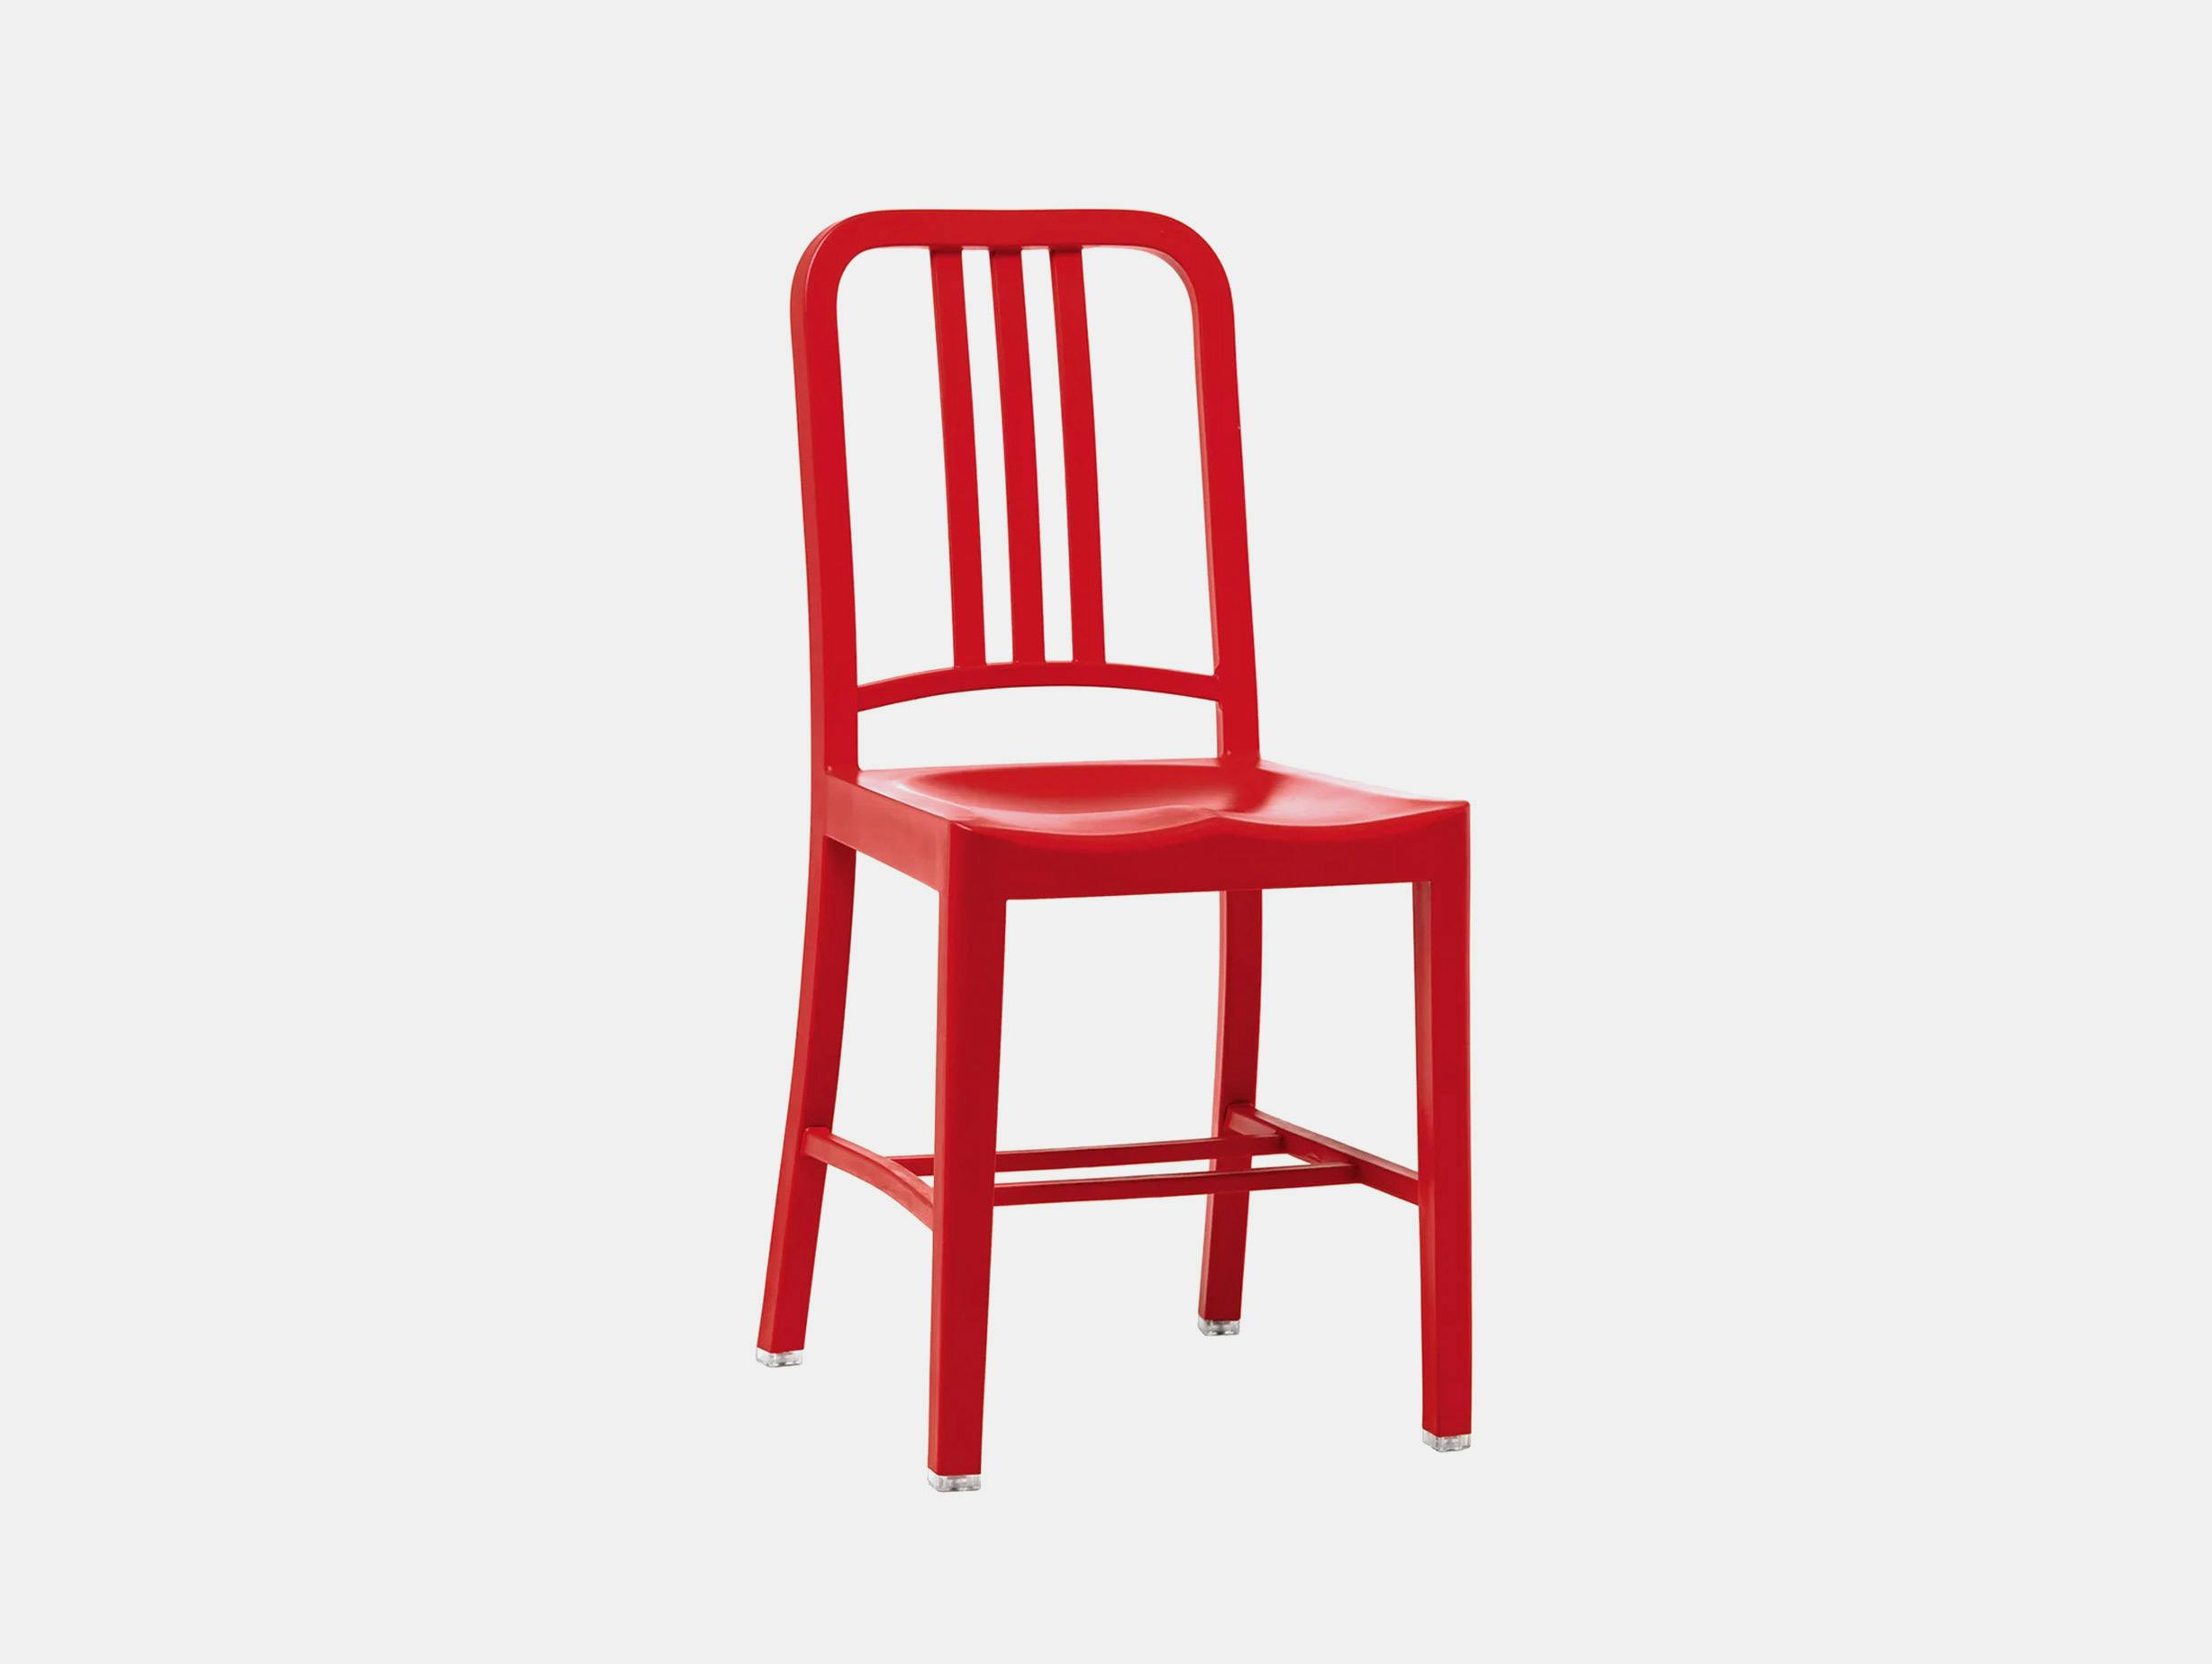 Emeco 111 navy chair red